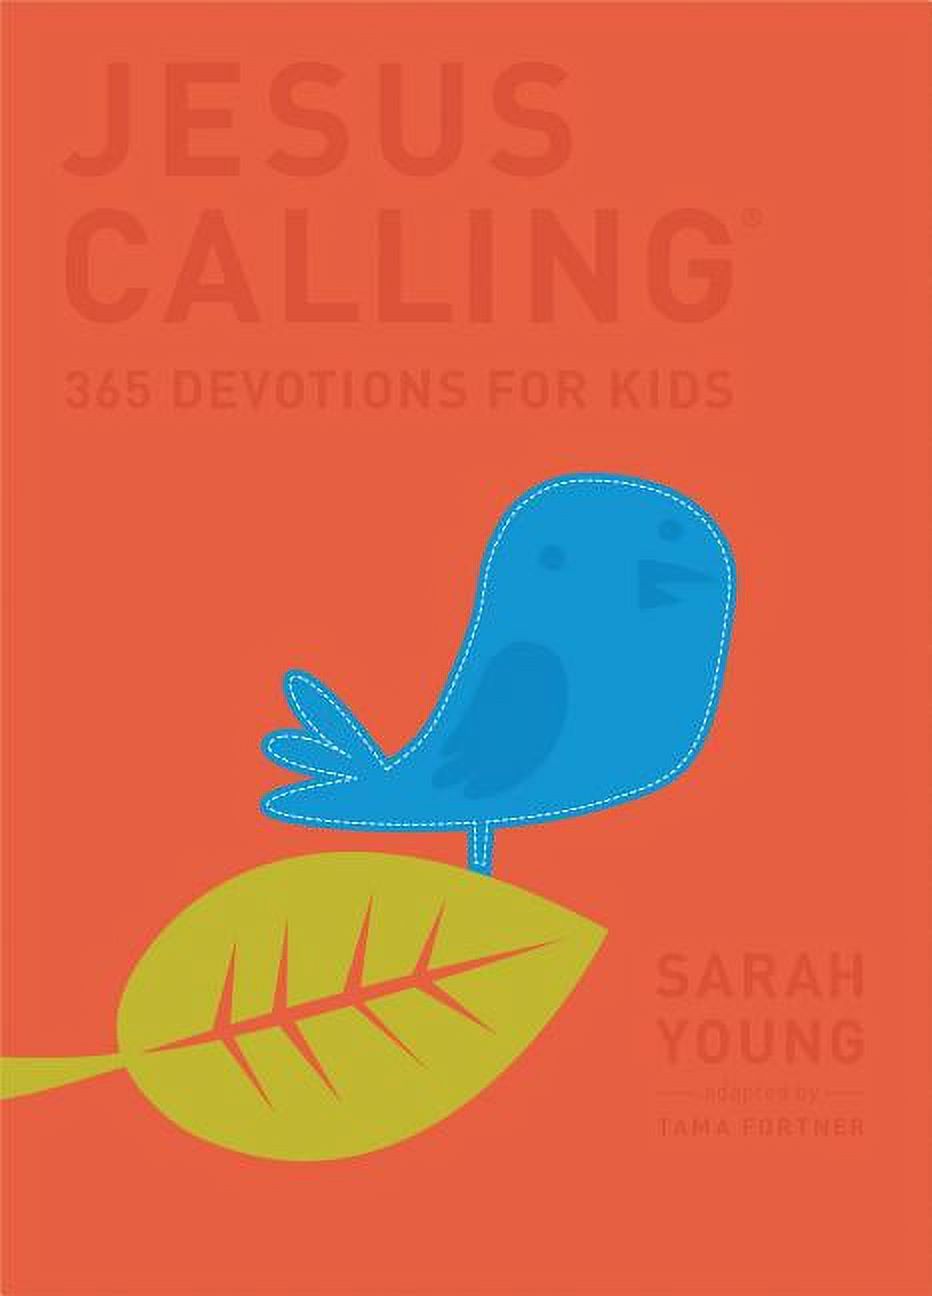 Jesus Calling: Jesus Calling: 365 Devotions for Kids: Deluxe Edition (Hardcover) - image 1 of 2